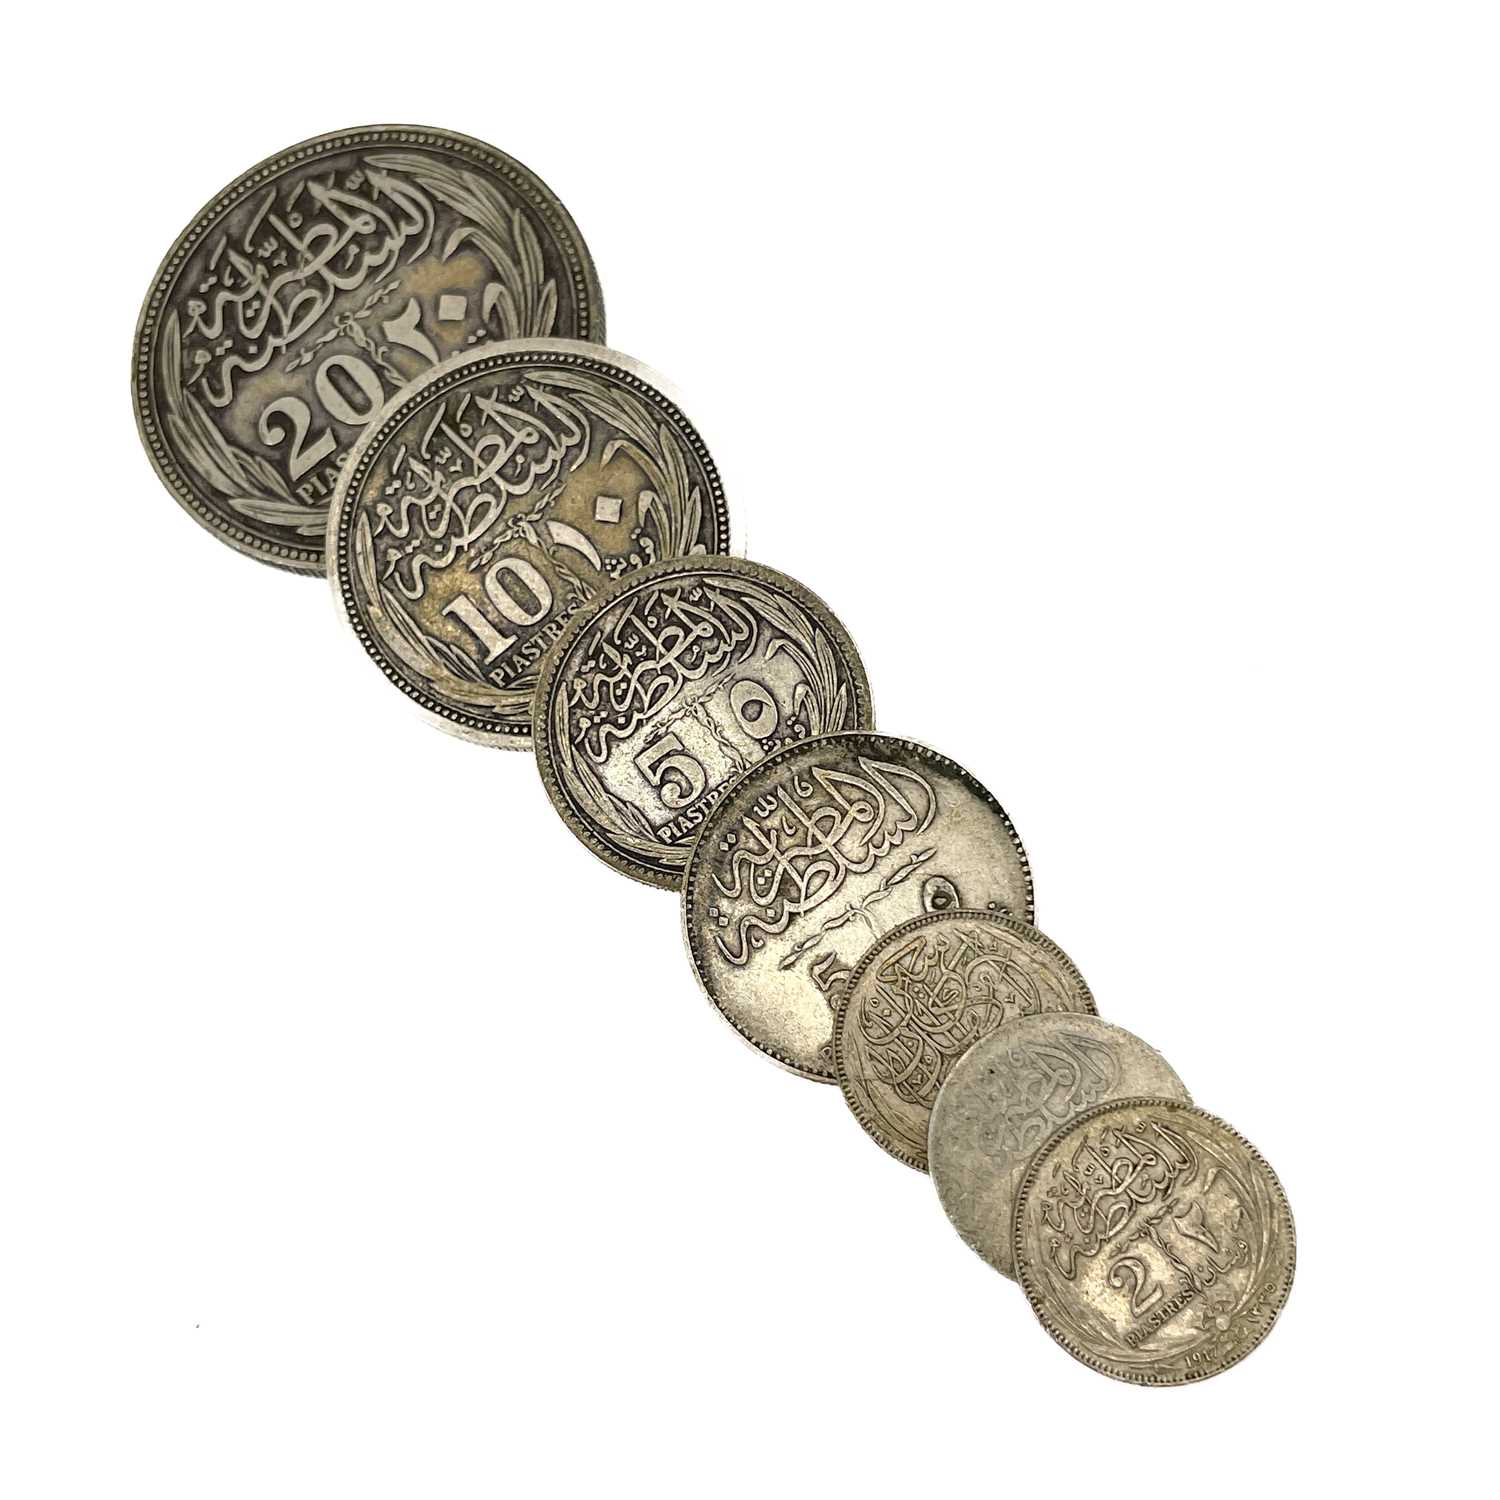 Late 19th/Early 20th Century Egypt Silver Coinage. - Image 4 of 5